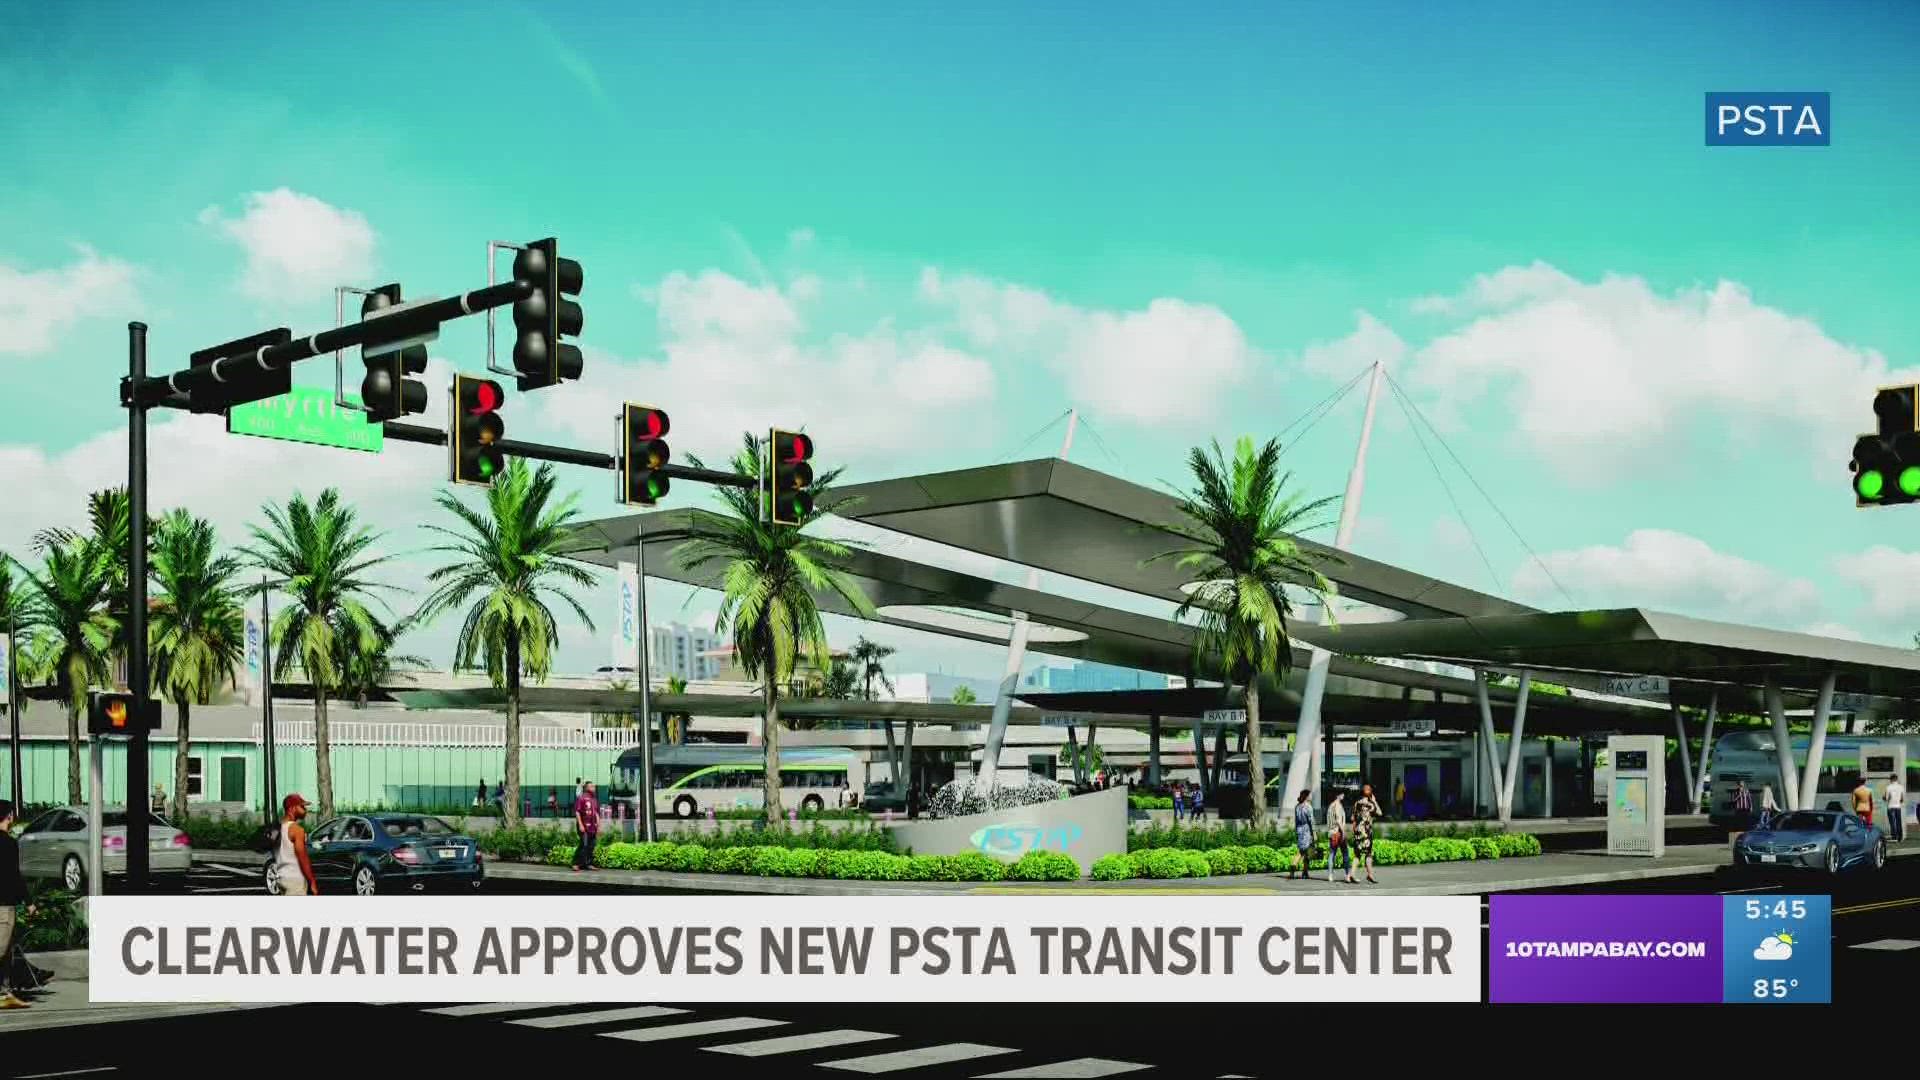 An approved new transit center will support downtown businesses and relieve area traffic congestion while also replacing a 40-year-old facility nearby.